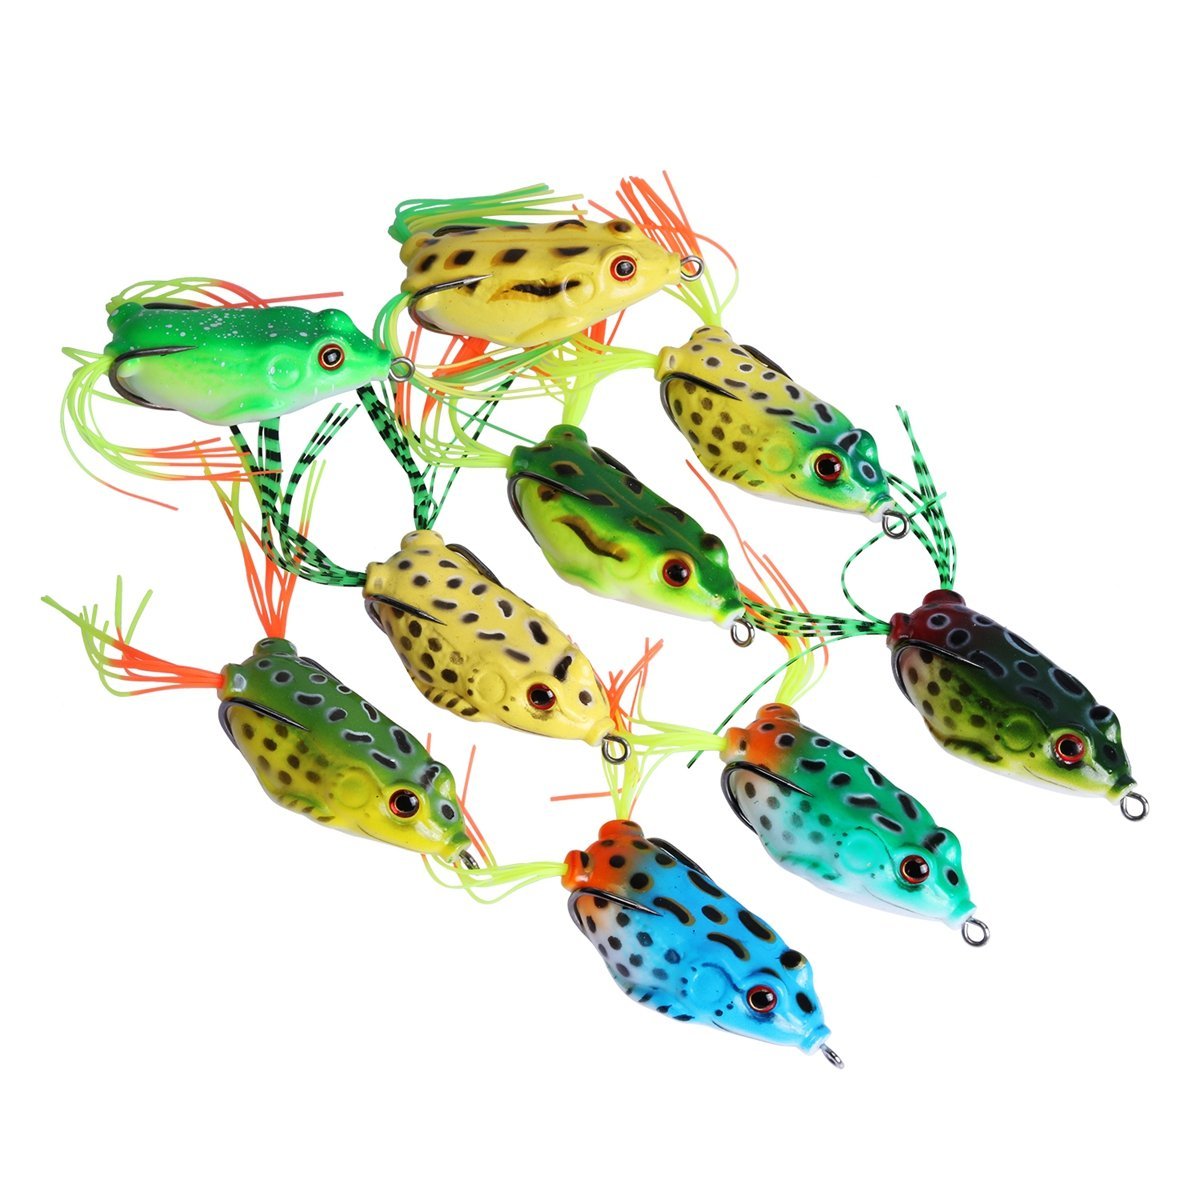 Ultimate Wacky Worm Fishing Kit: 32 Vibrant Worms, Hooks, and More